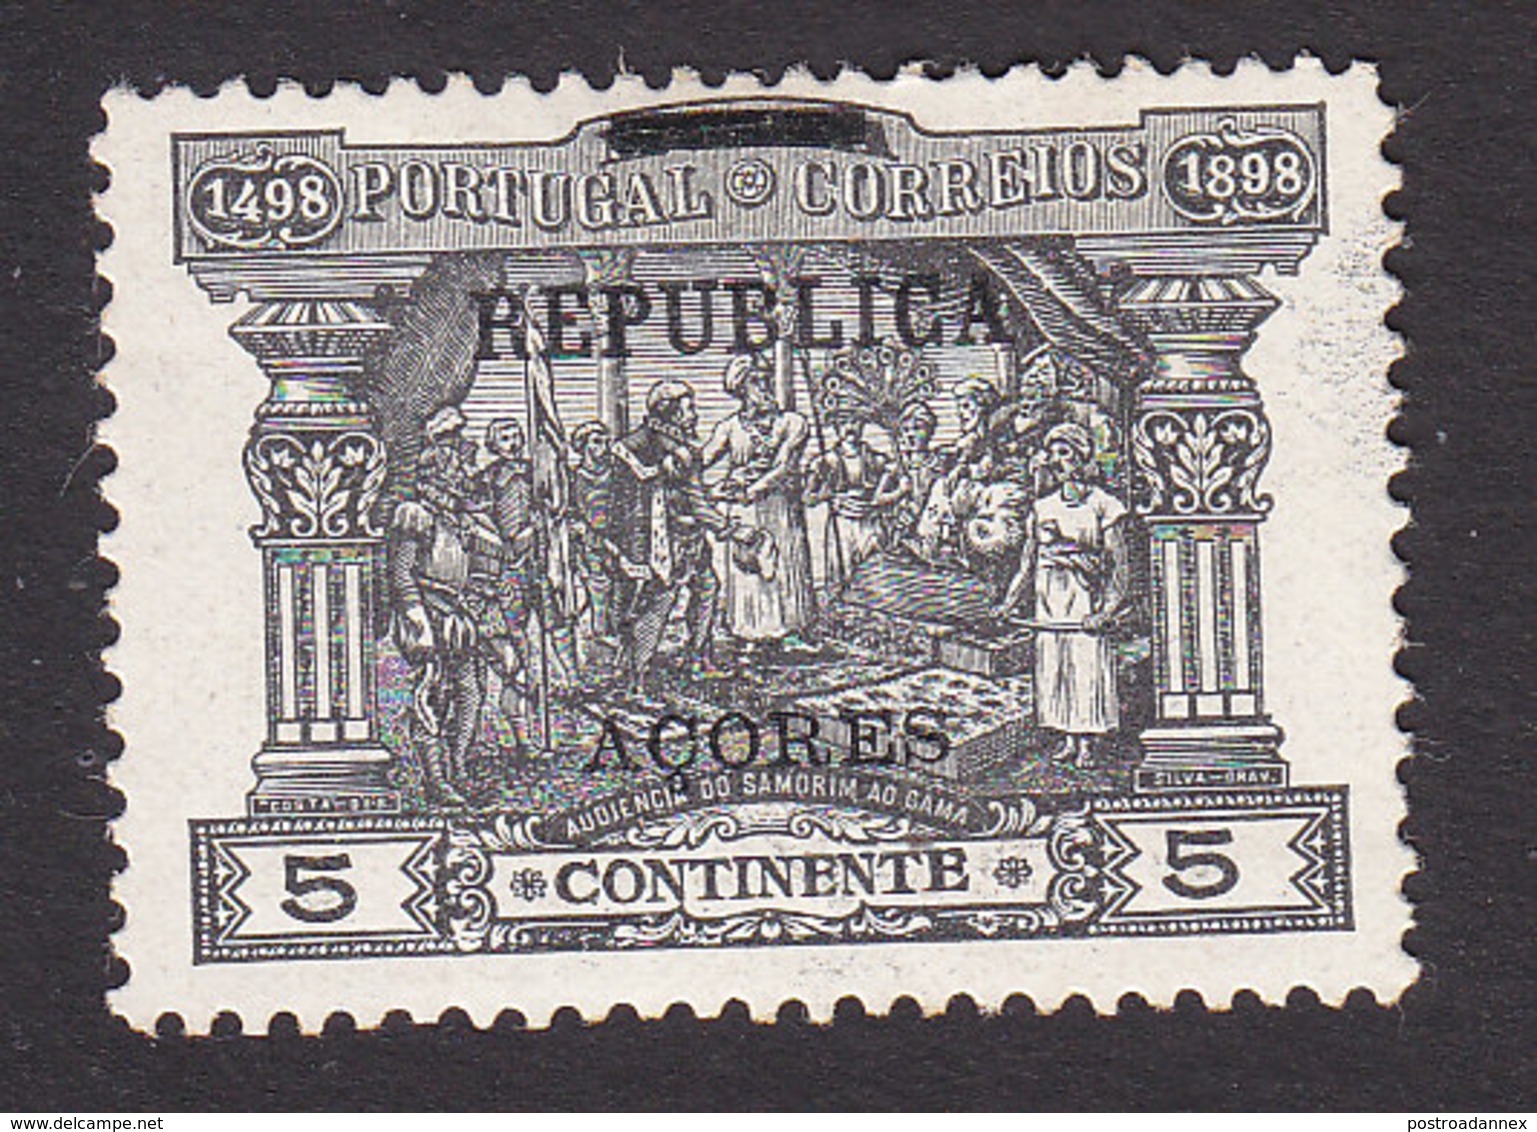 Azores, Scott #149, Mint Hinged, Postage Due Overprinted, Issued 1911 - Azores